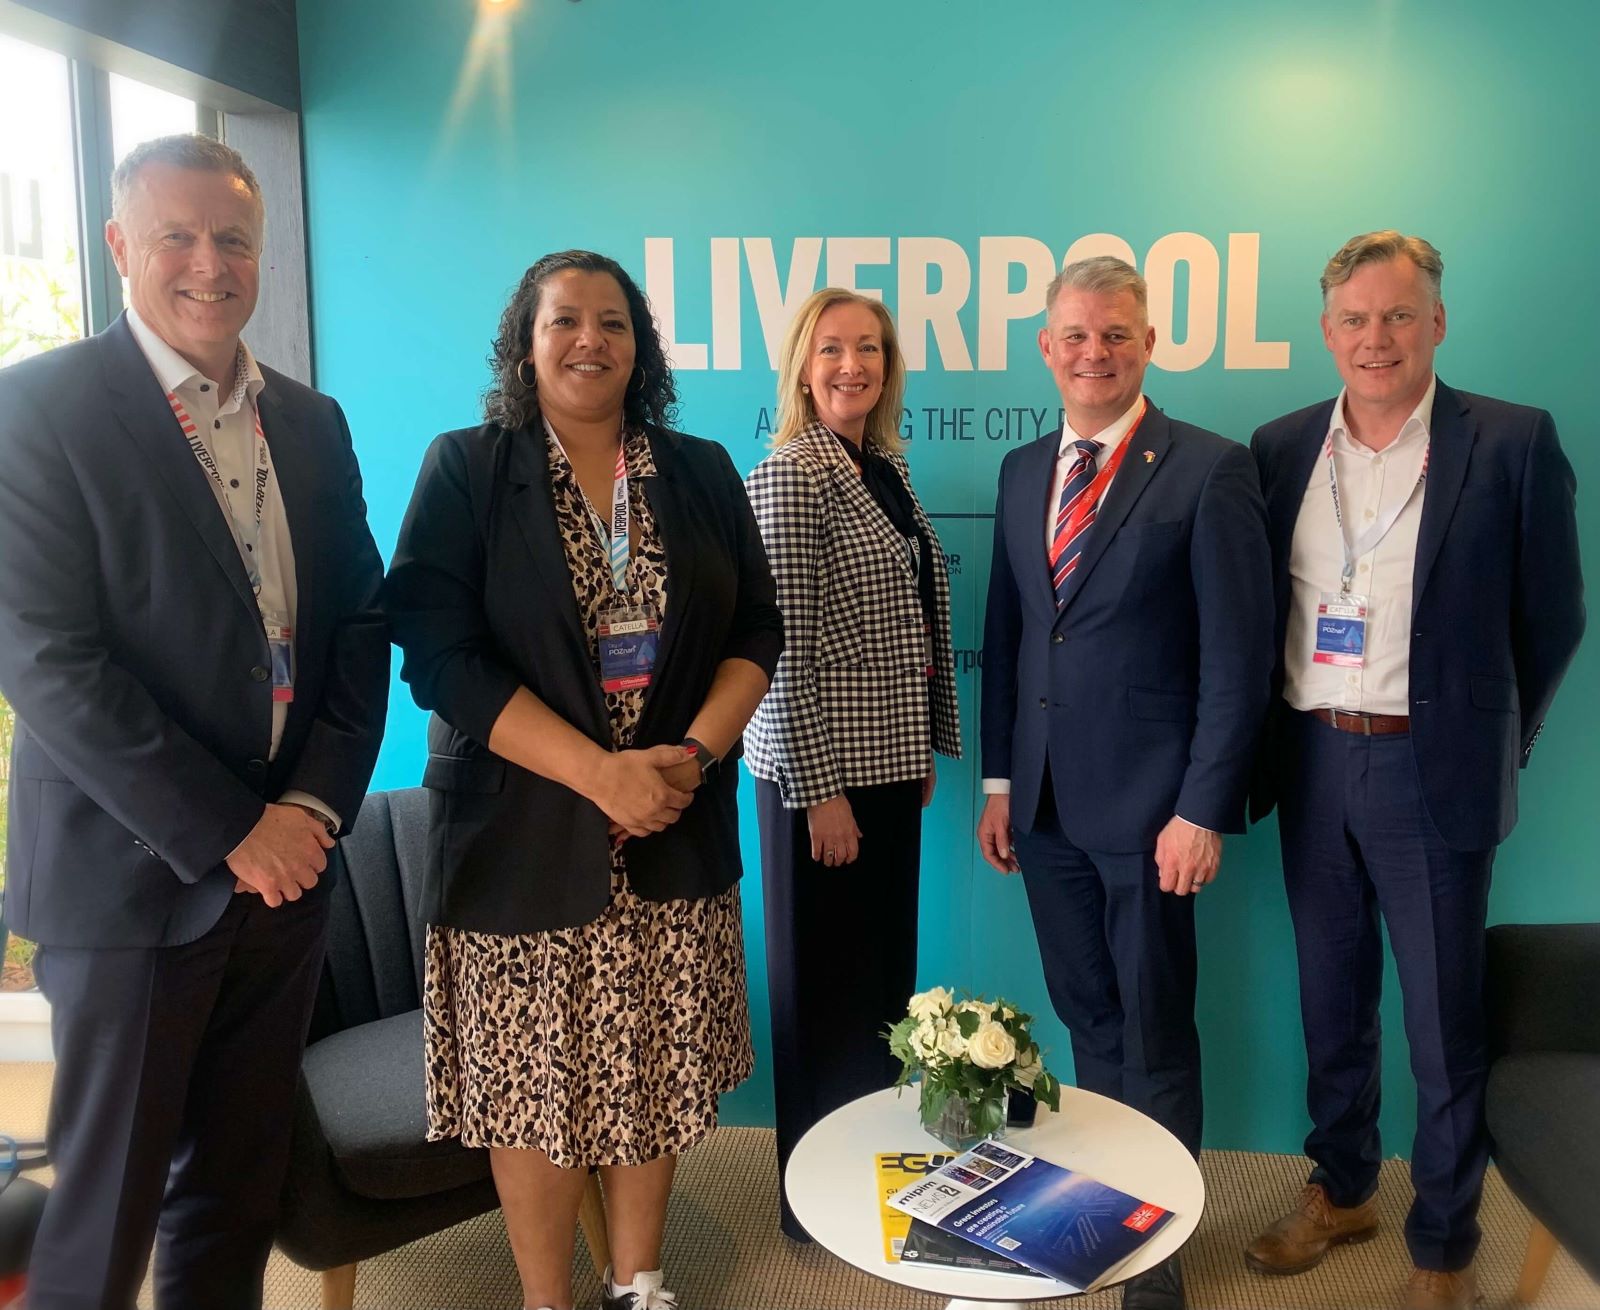 l-r: Liverpool City Council CEO, Tony Reeves, Mayor of Liverpool, Joanne Anderson, Liverpool City Region Combined Authority CEO, Katherine Fairclough, Stuart Andrew MP, UK Housing Minister and Liverpool Place Partnership Chair & Principal and Managing Director of Avison Young │UK #Liverpool, Stephen Cowperthwaite.